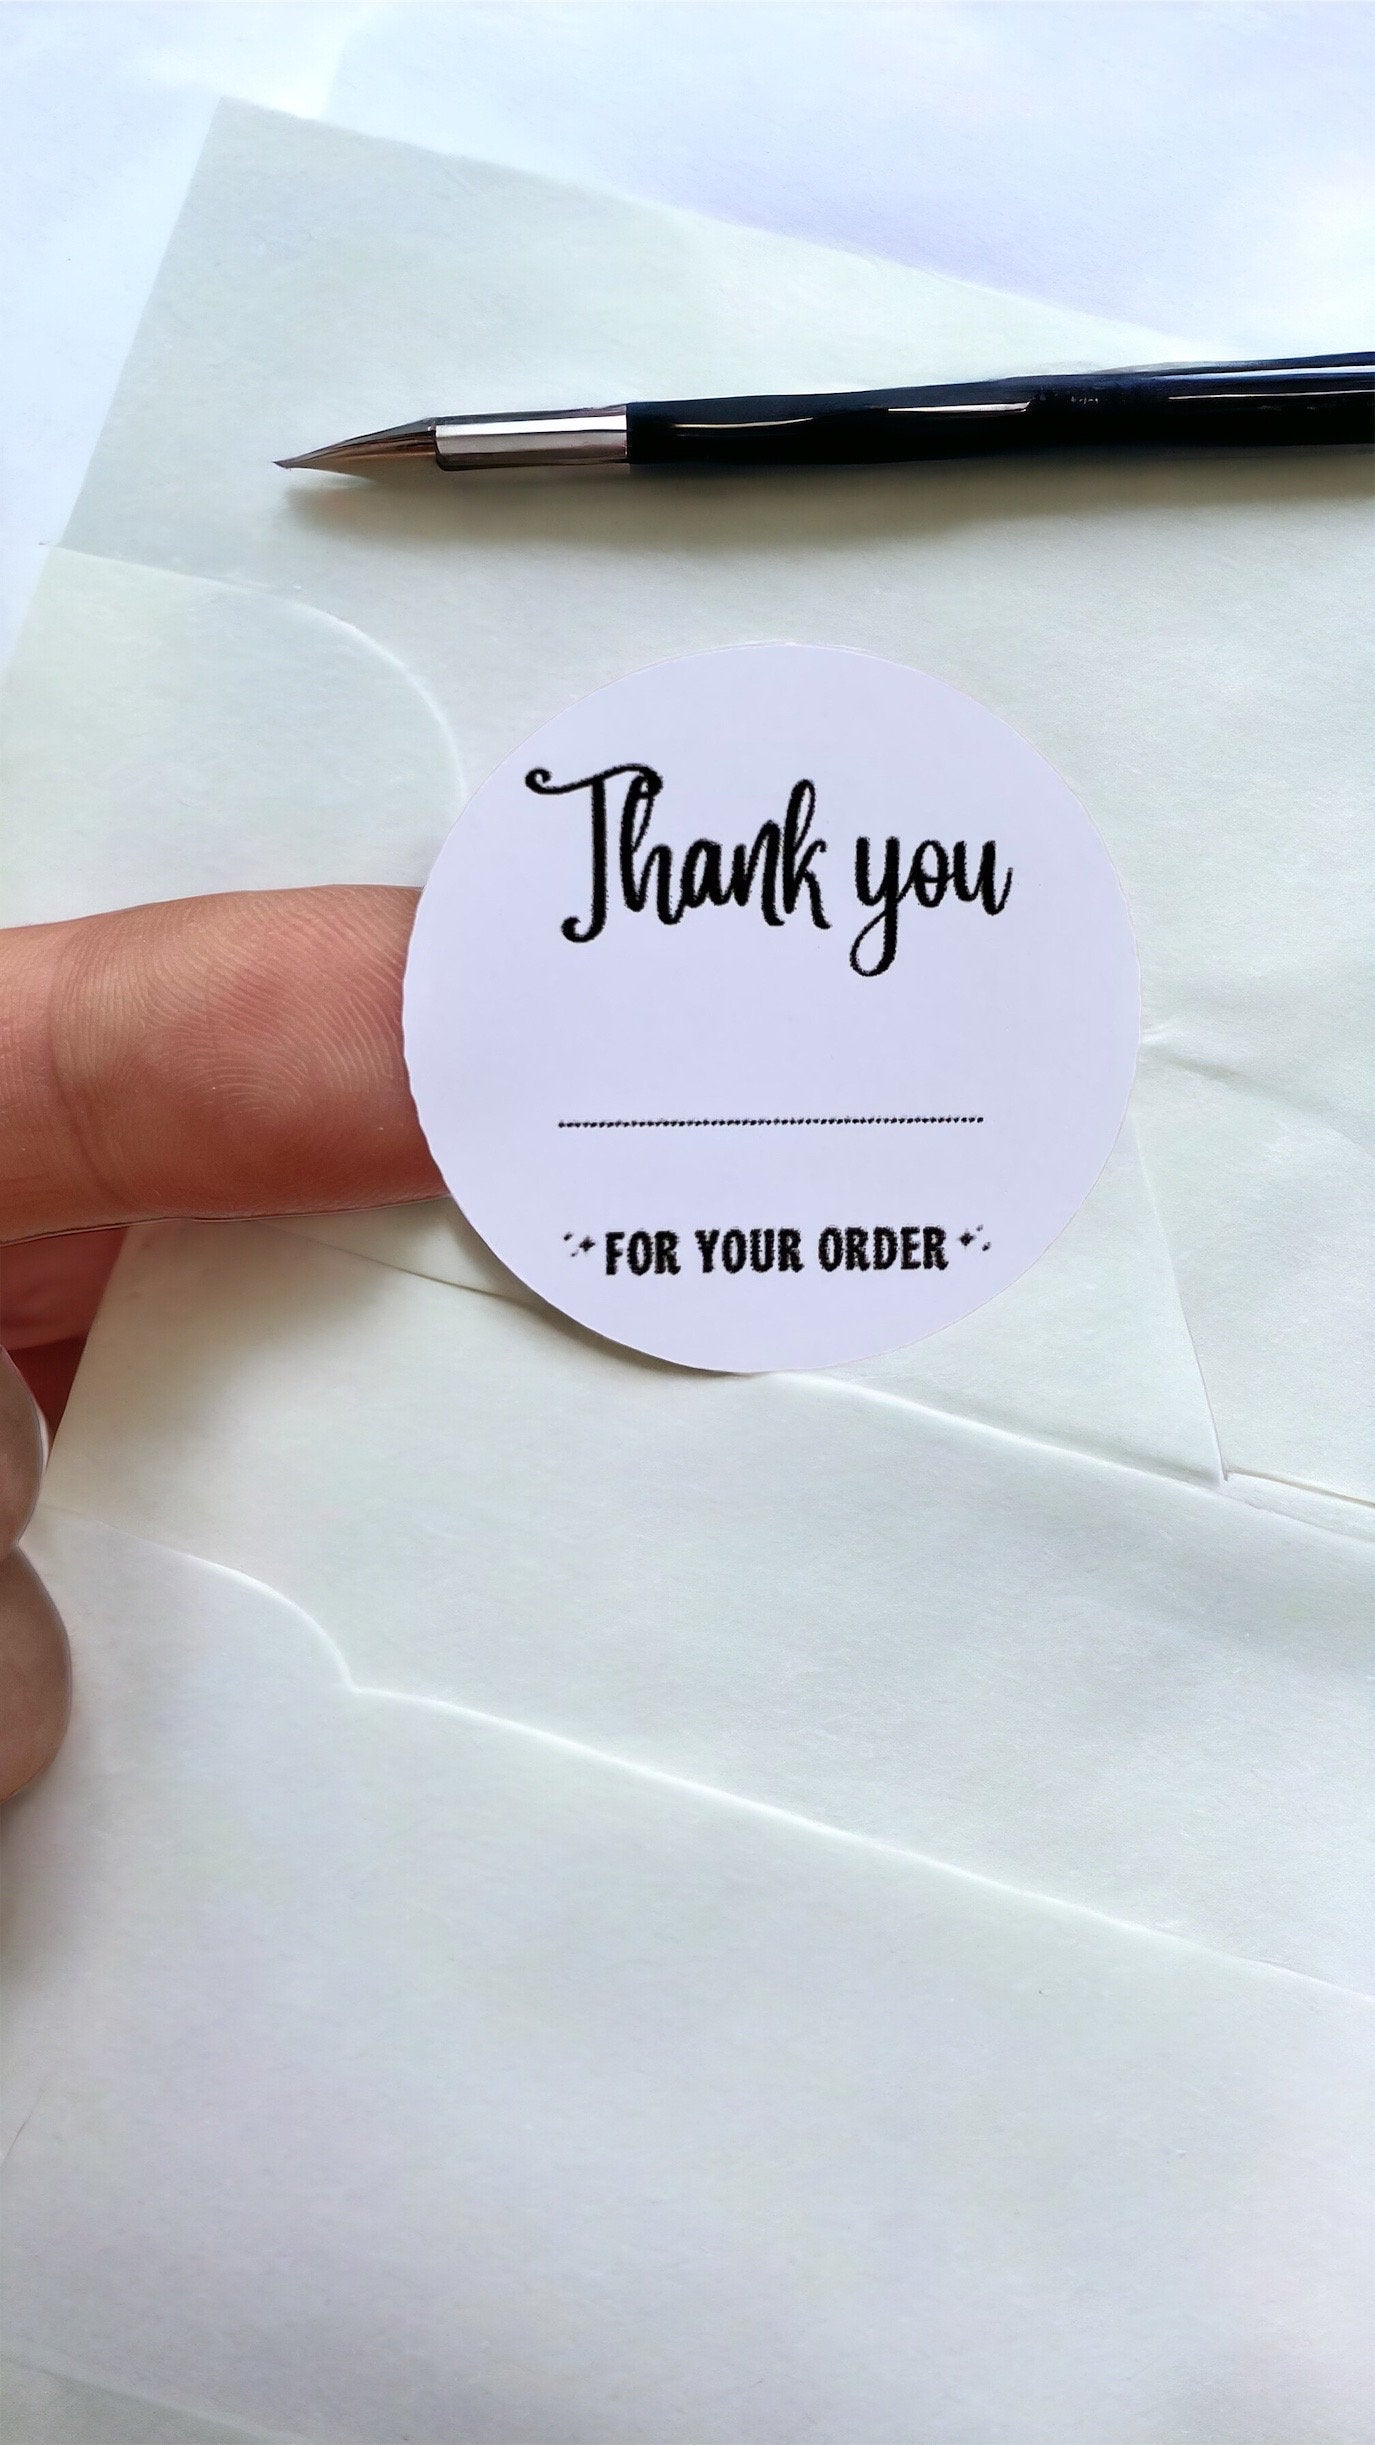 Thank you for order personalise | thank you business sticker | 38mm stickers | small business product label | packaging handmade